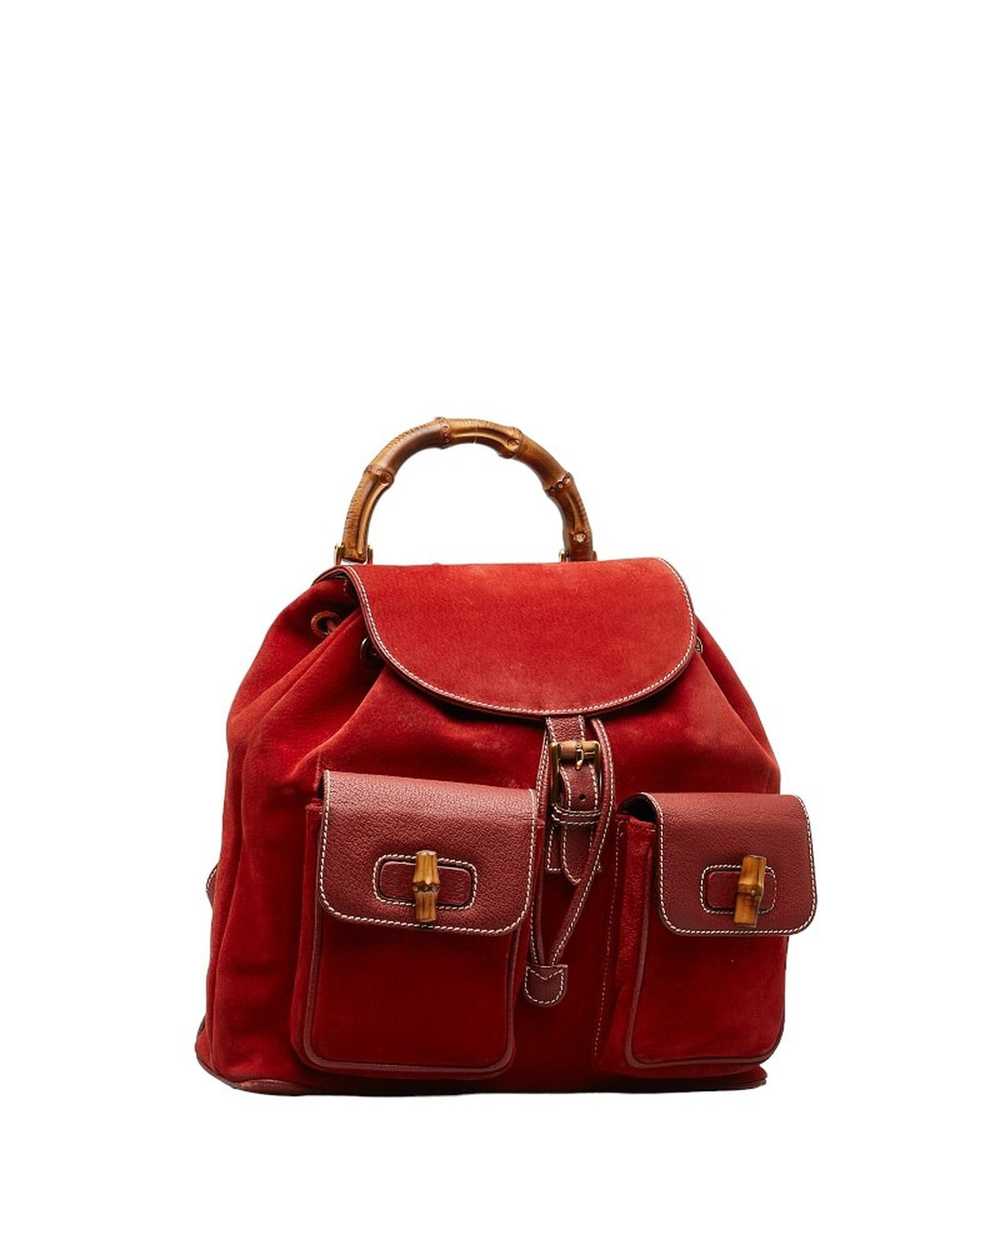 Gucci Red Suede Bamboo Backpack Bag - image 2